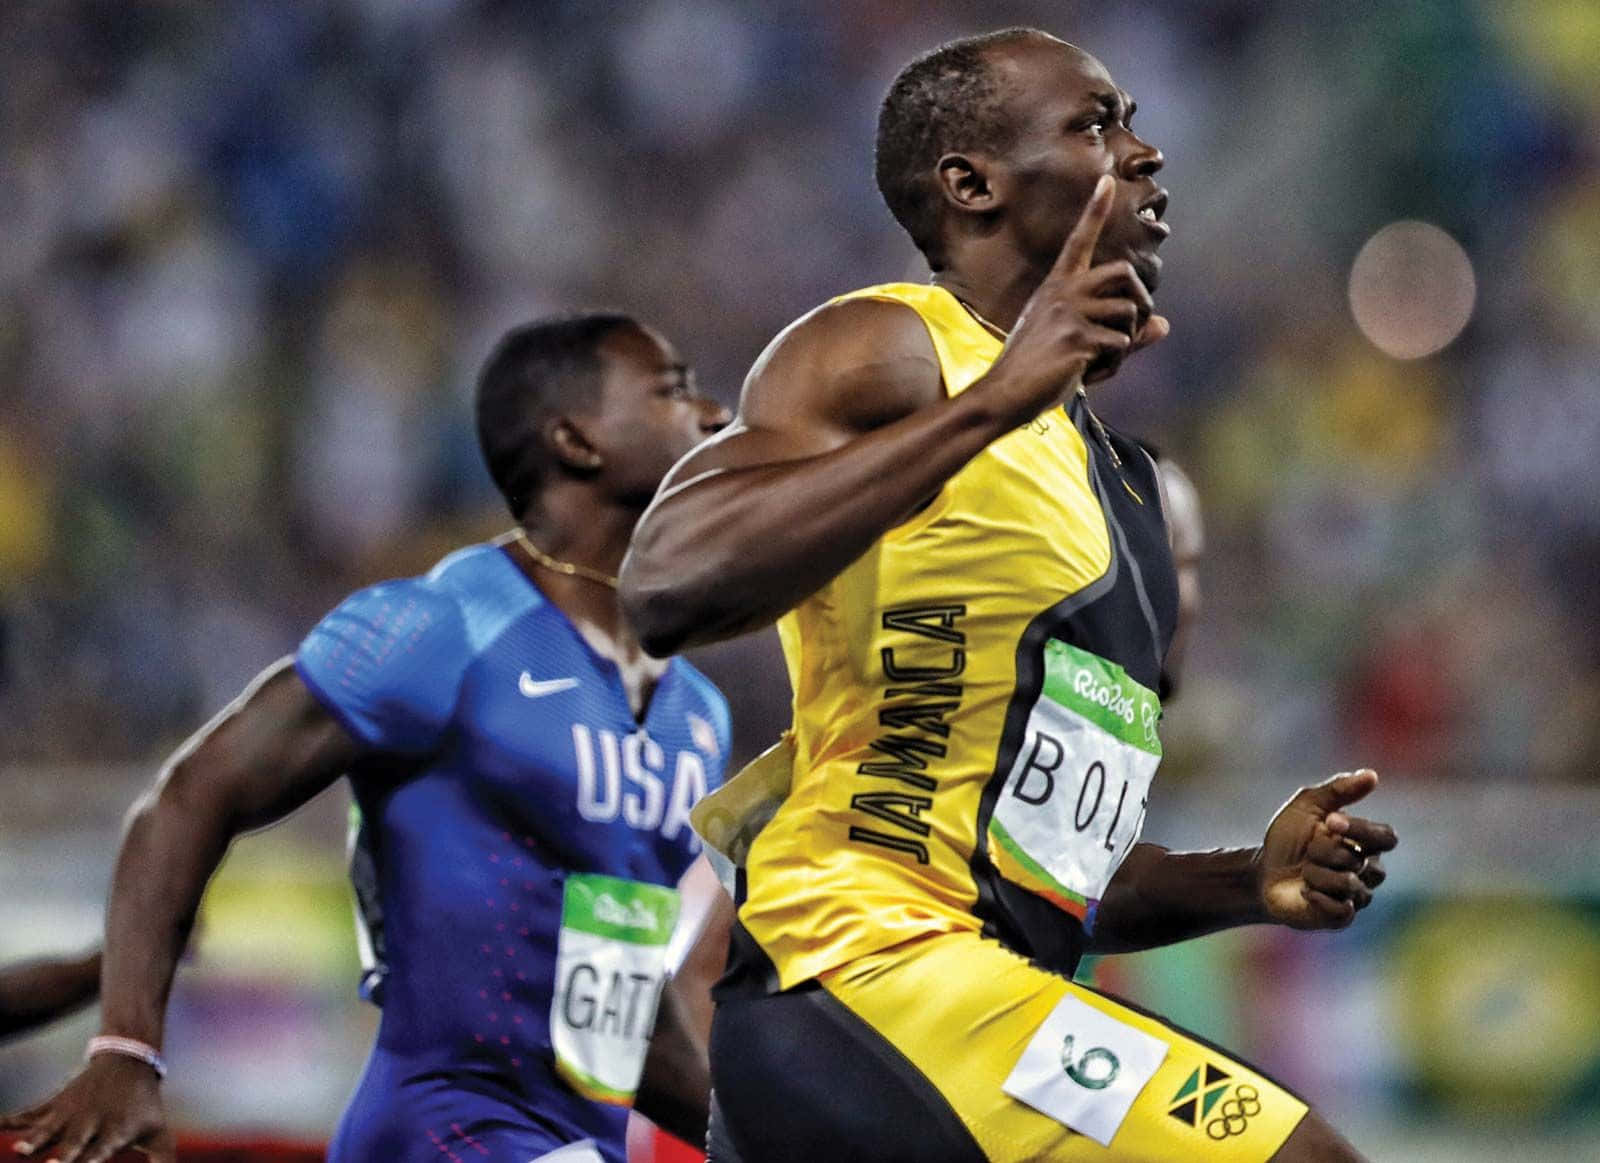 Usain Bolt Racing With Another Runner Wallpaper